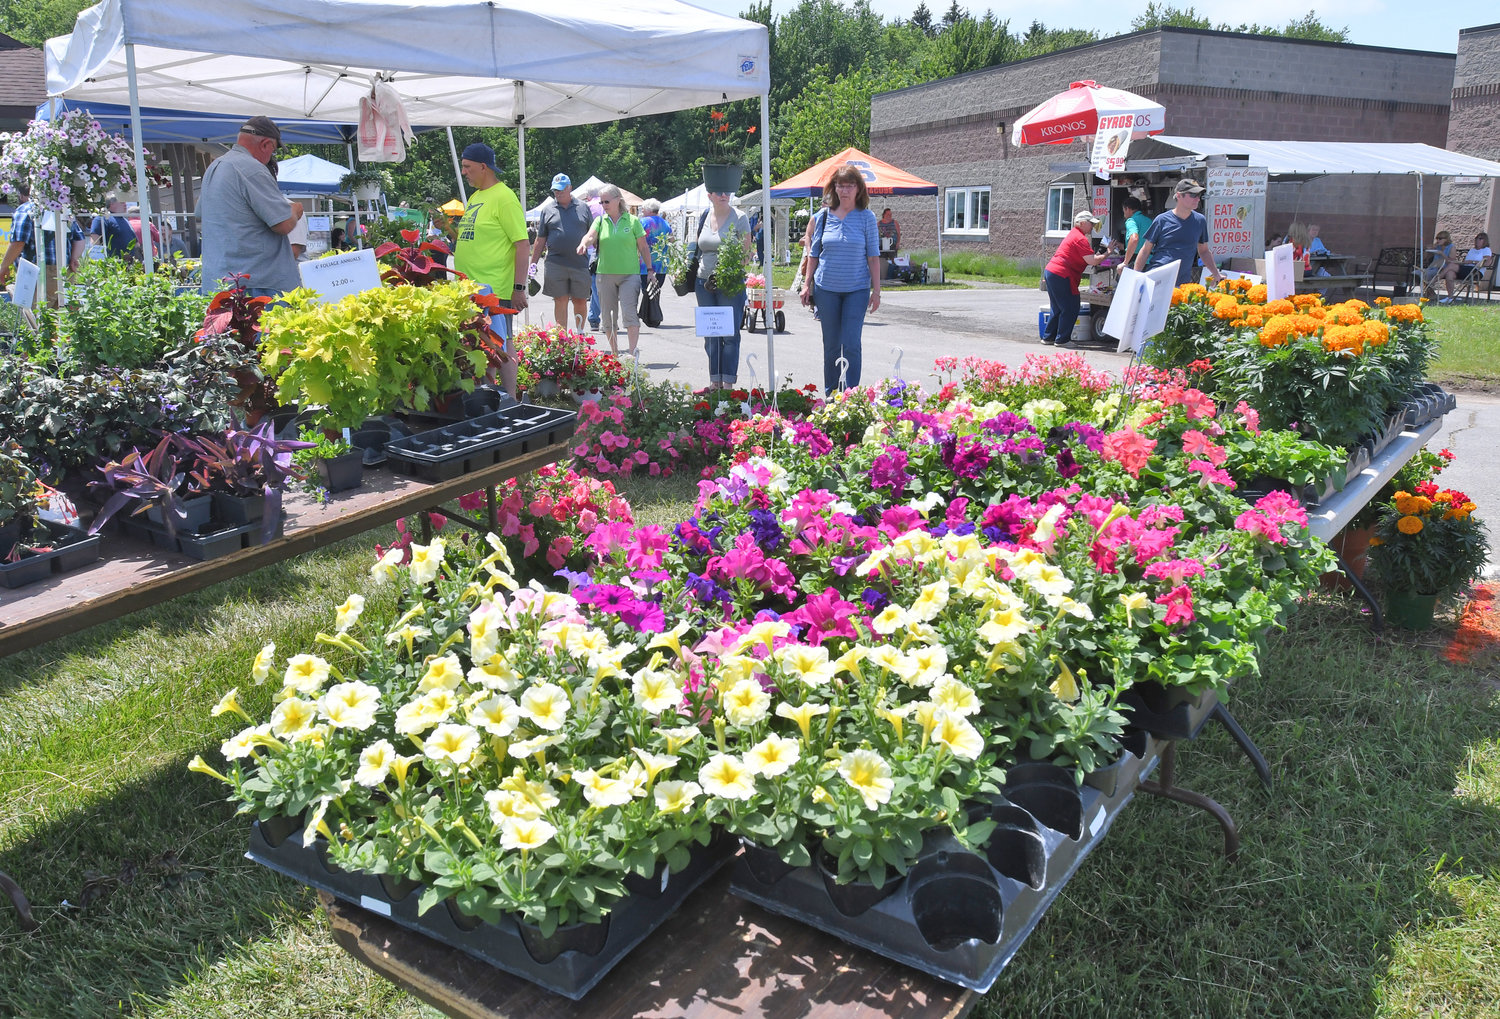 GREEN THUMBS — Flowers are shown for sale at the popular Herb &amp; Flower Festival in this file photo. The event is set to return in June after a two-year pause due to COVID-19.